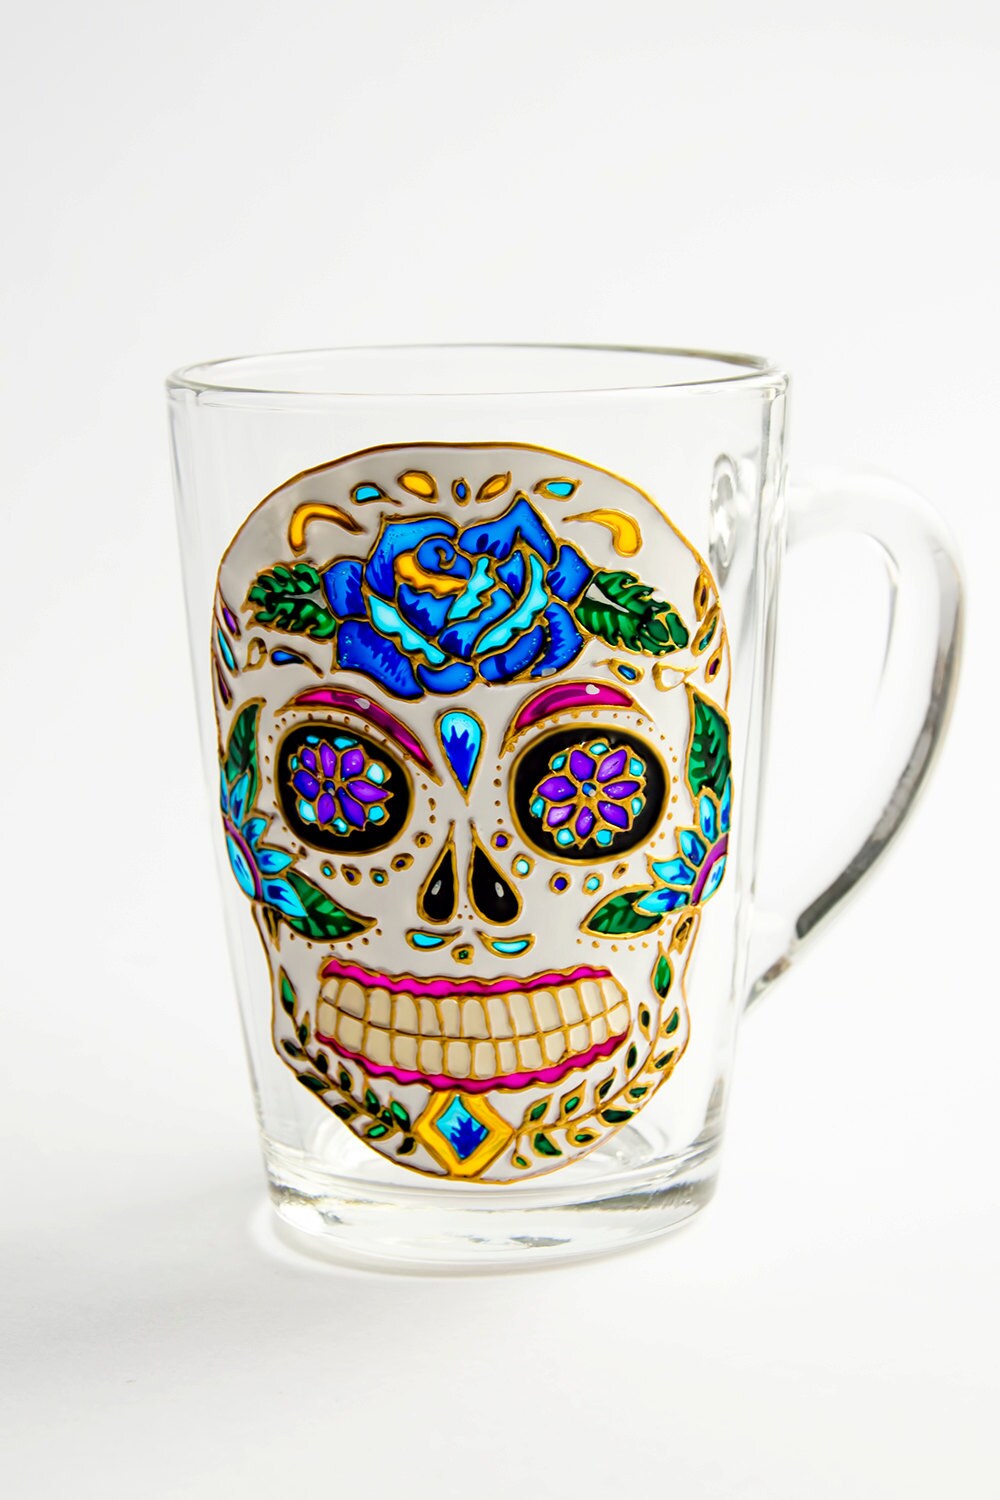 Details about   Day of the Dead DOD Sugar Skull Black Cup Coffee Mug